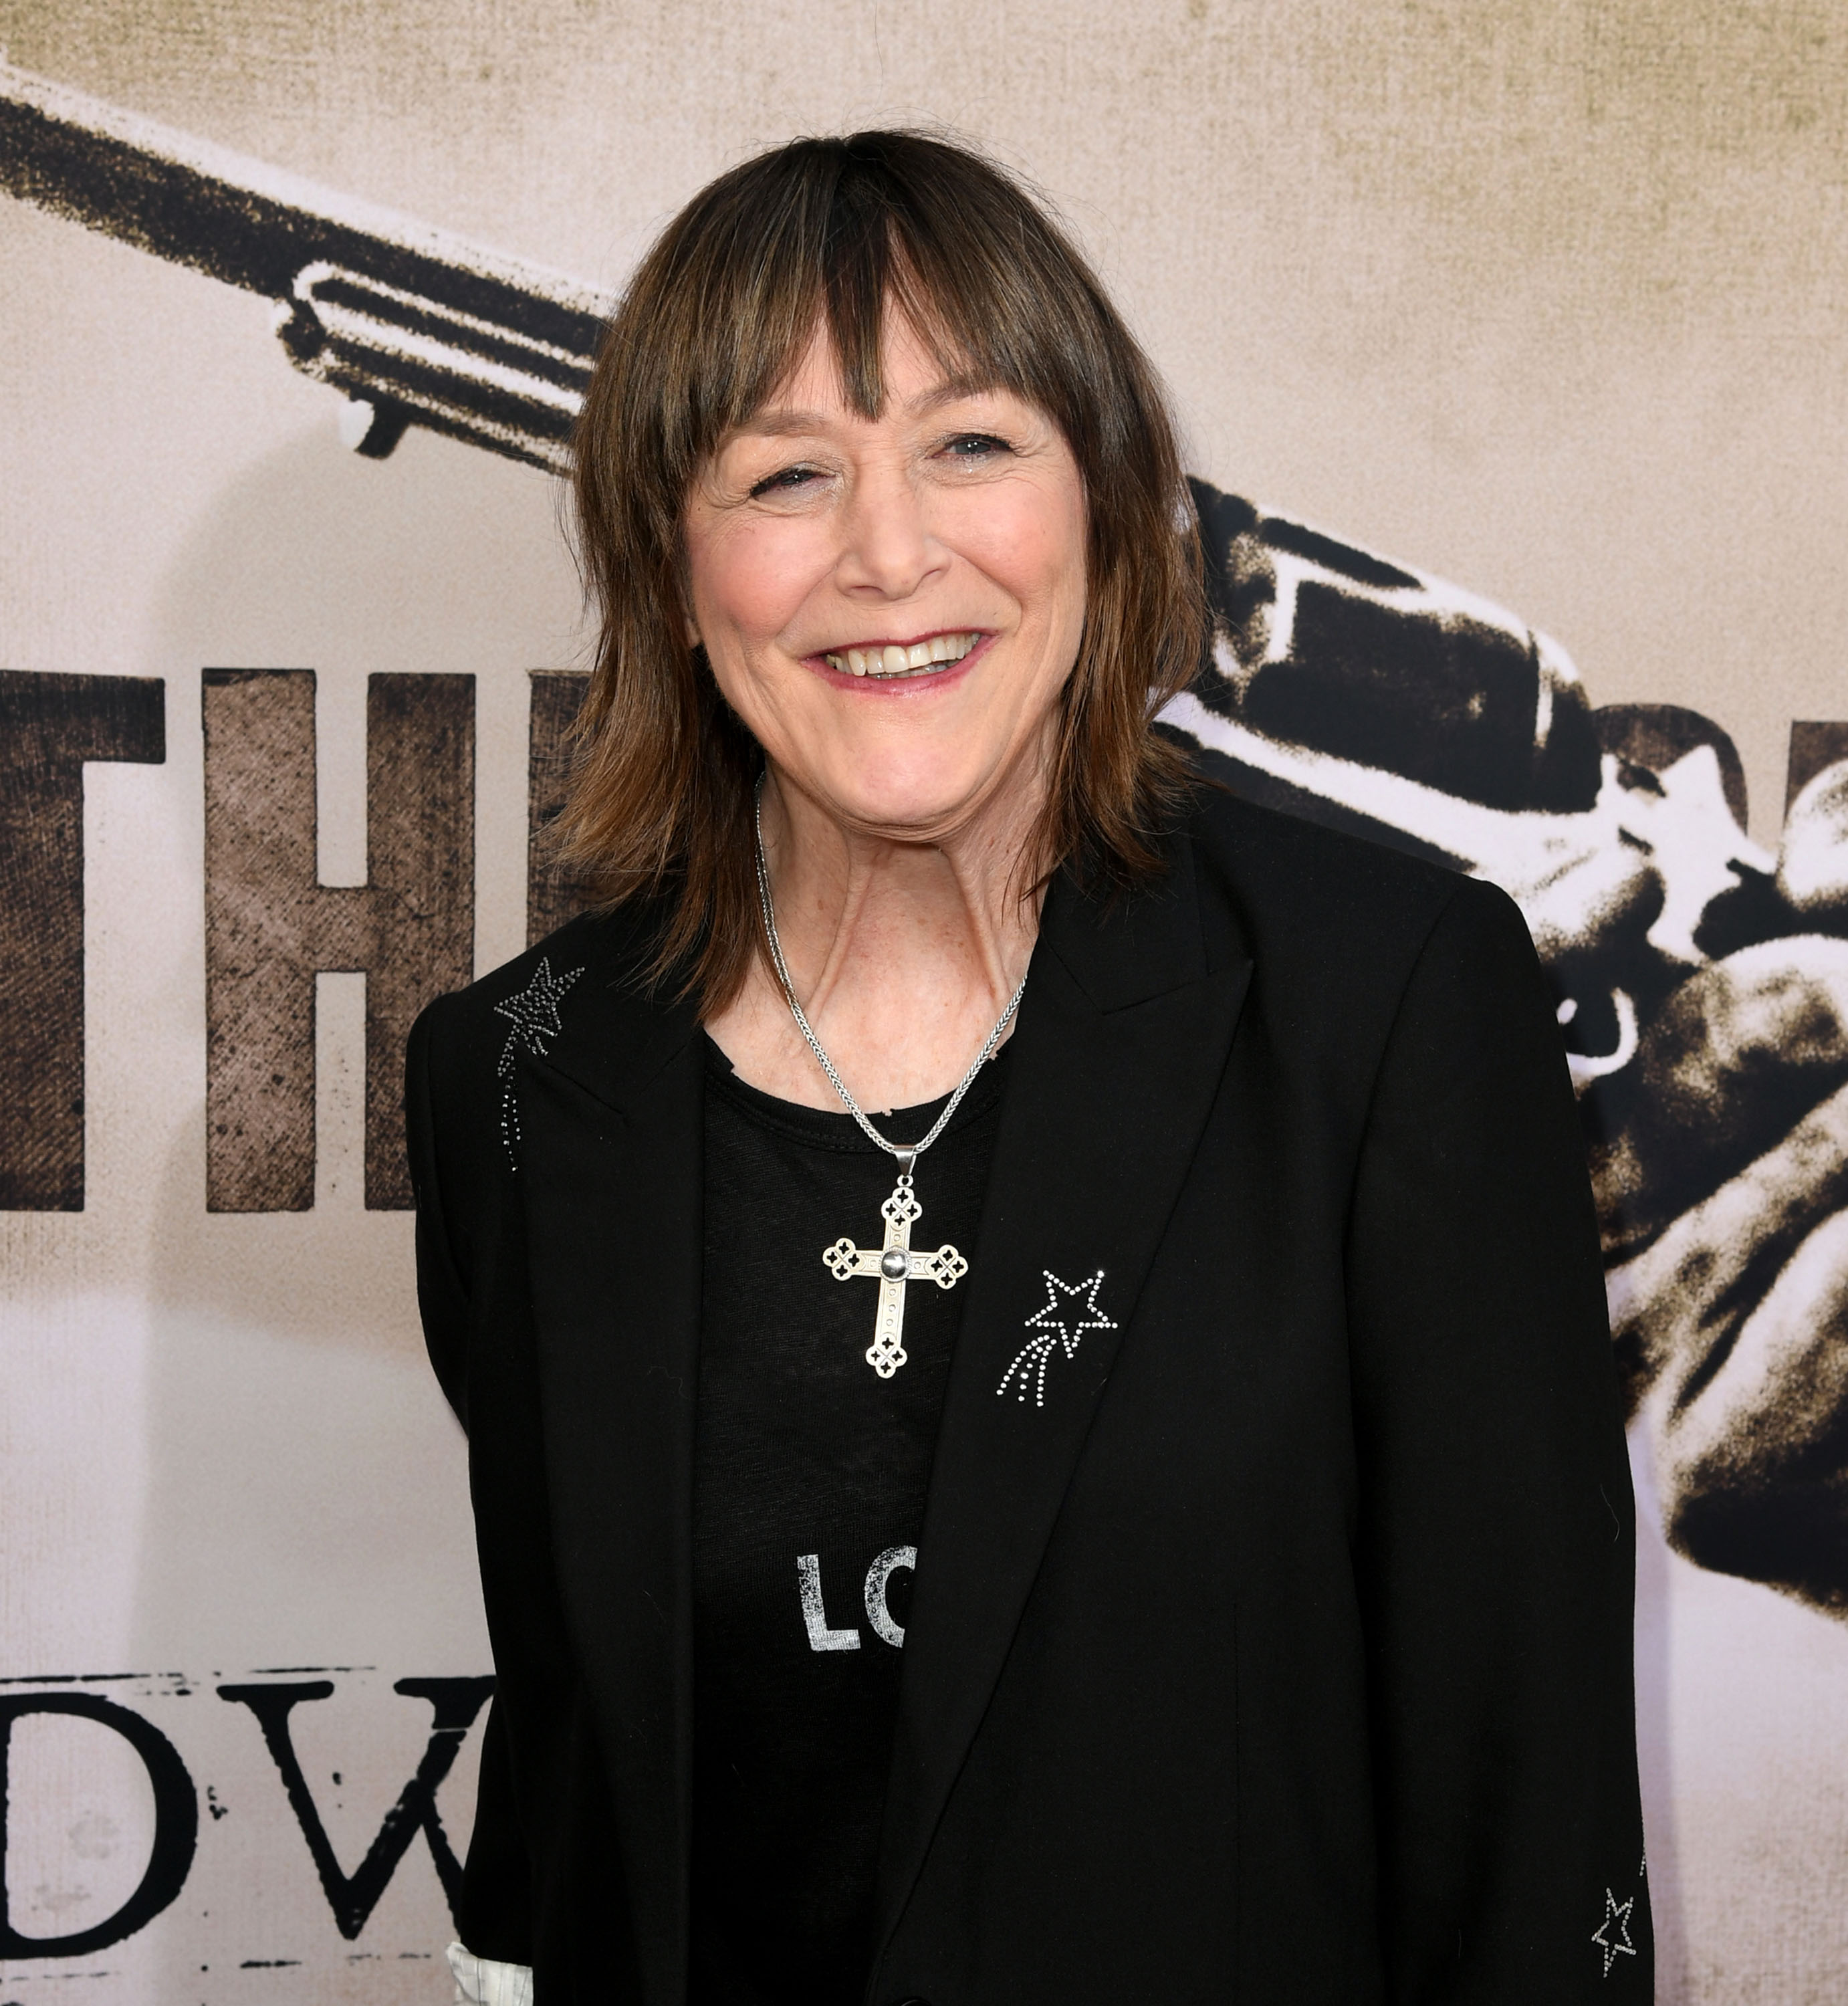 Geri Jewell arrives at the premiere of HBO's "Deadwood" at The Cinerama Dome on May 14, 2019 in Los Angeles, California | Source: Getty Images